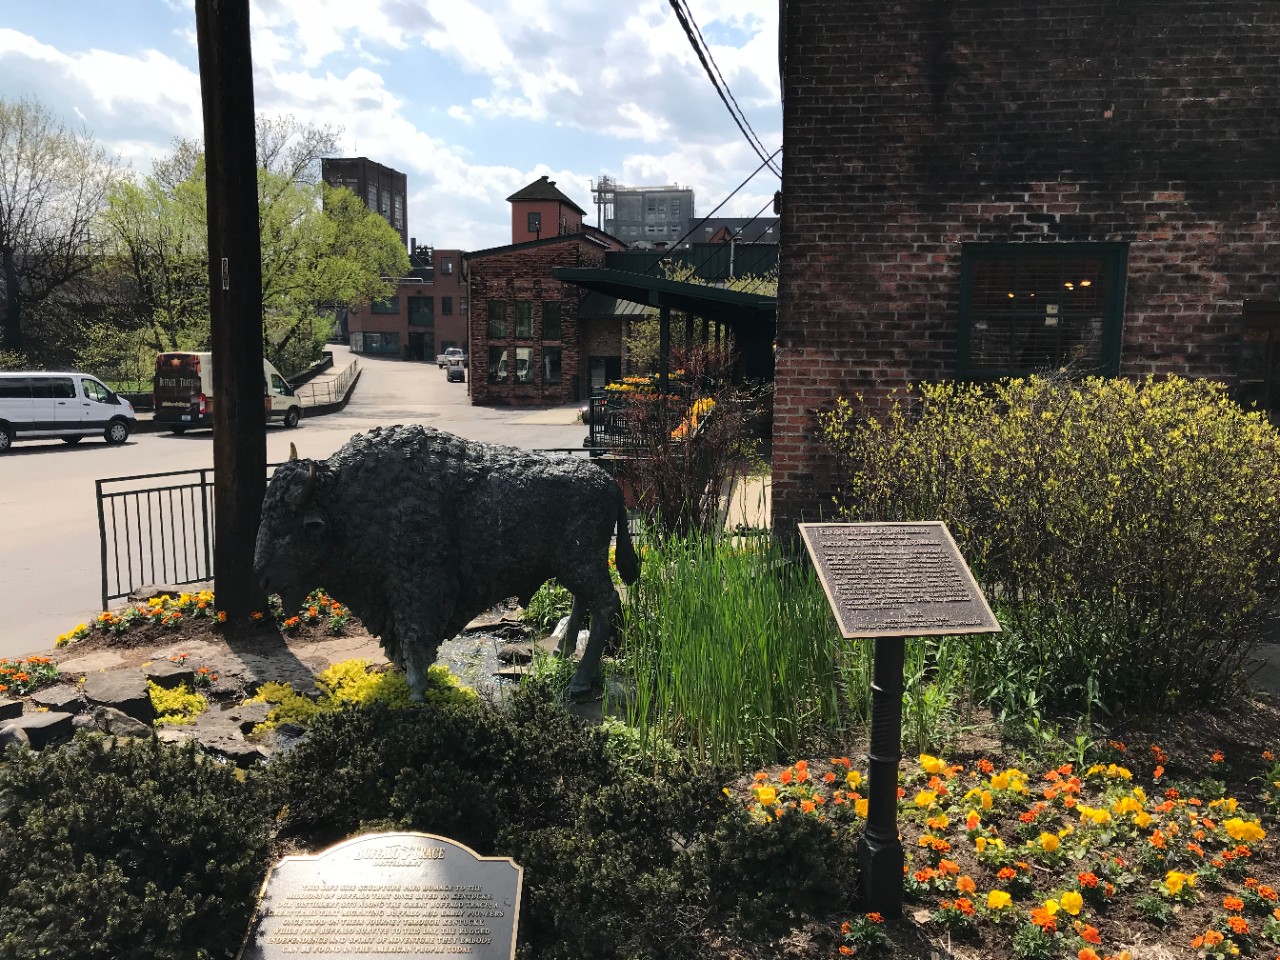 Image outside Buffalo Trace Distillery with buffalo statue in front